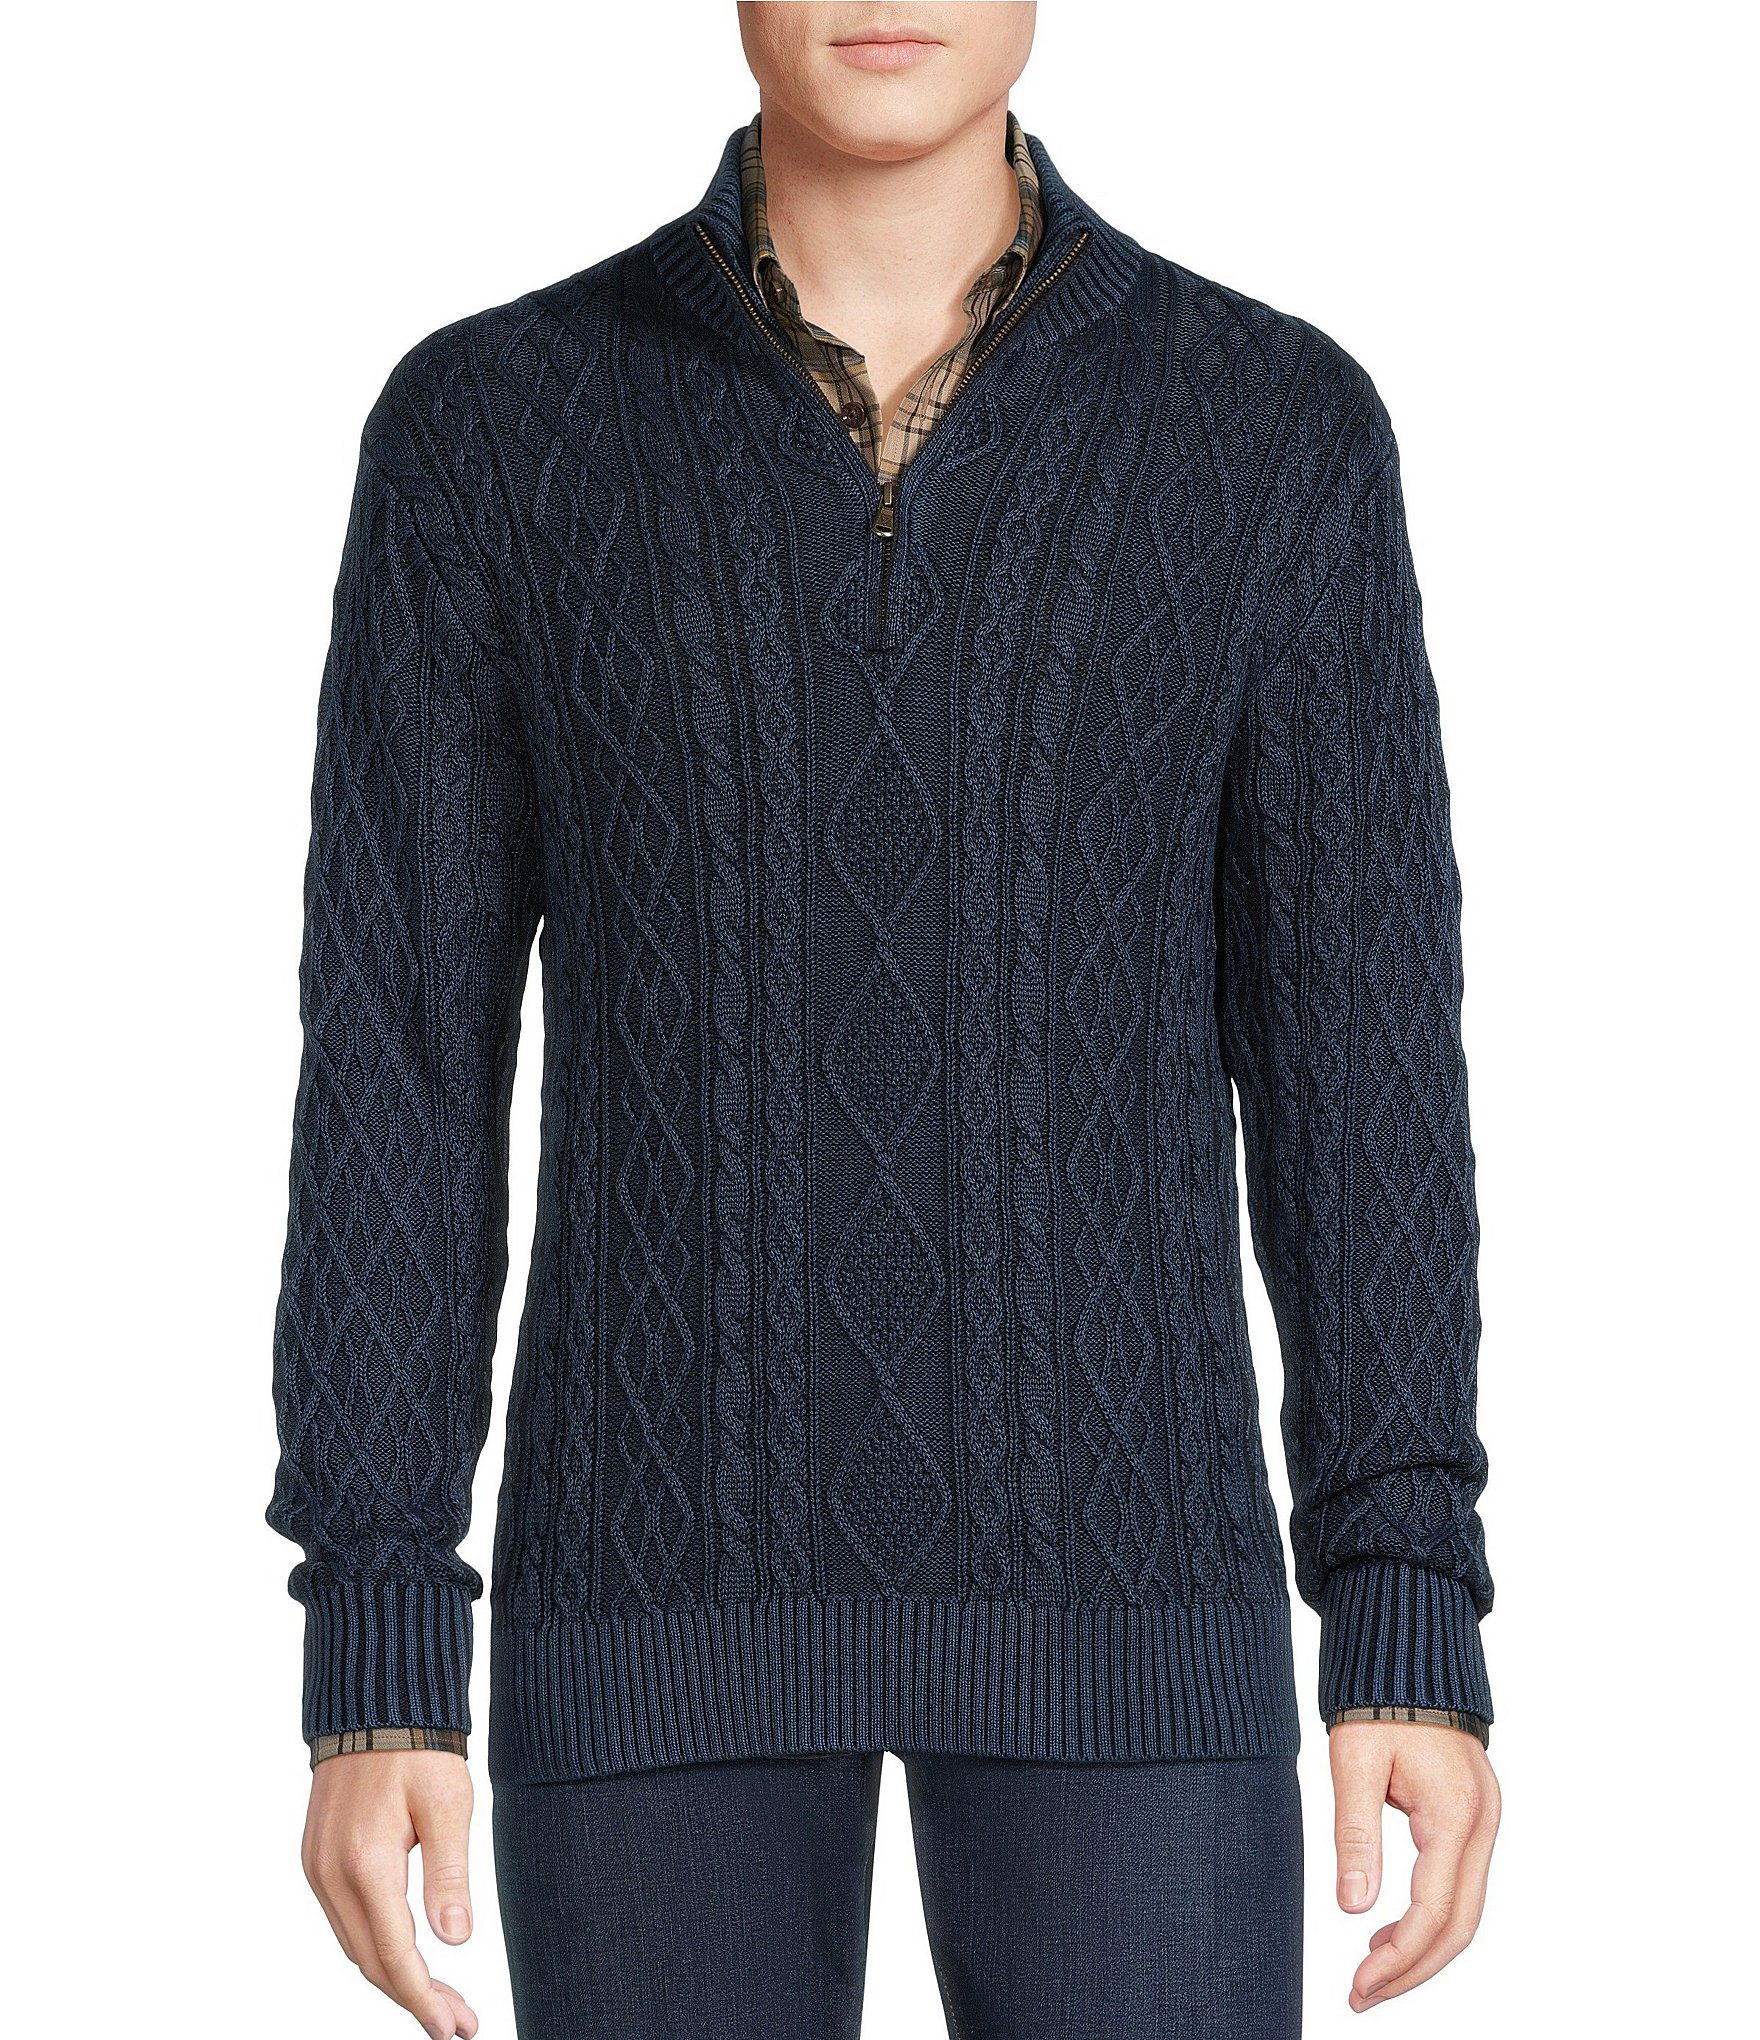 Cremieux Blue Label The Gamekeeper Collection Garment-Dyed Cable Knit ...